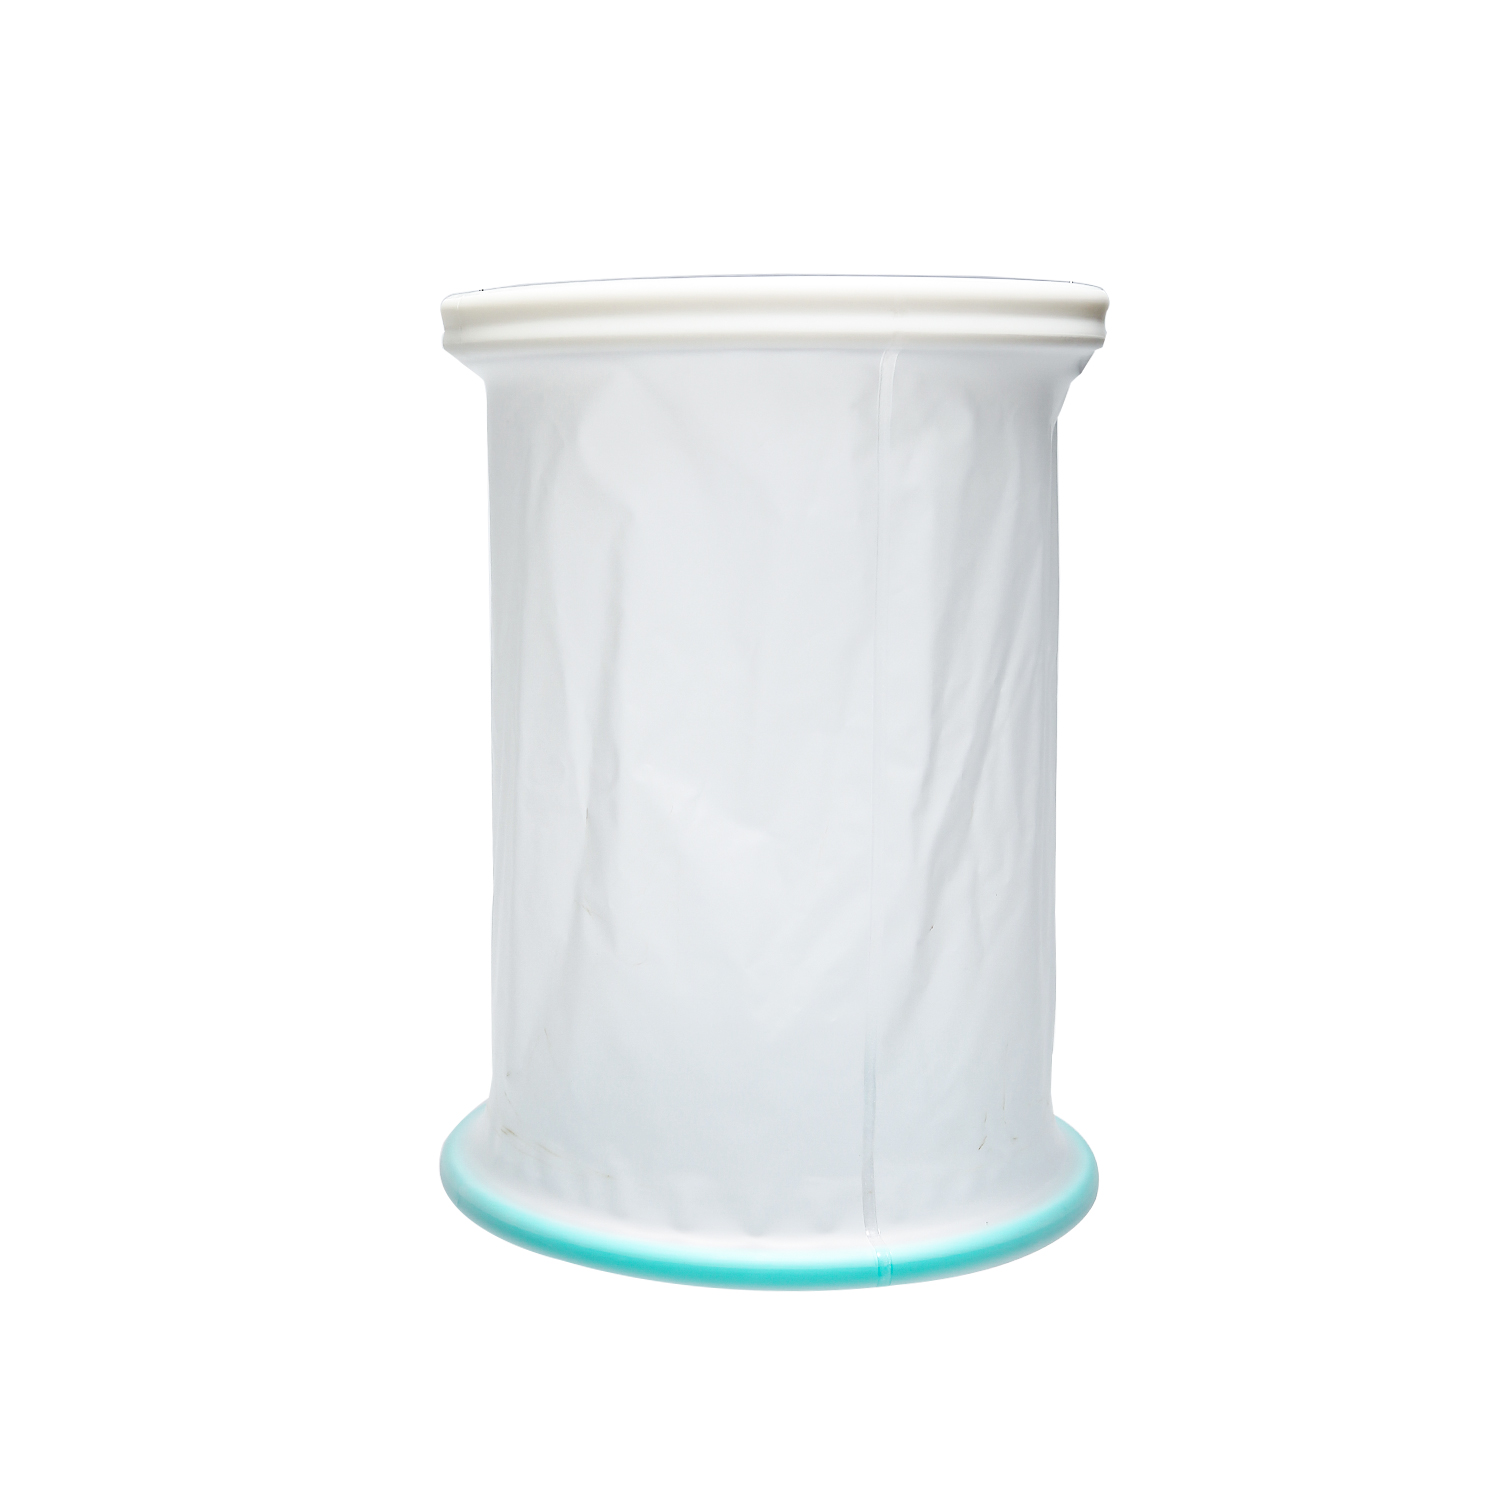 Sterile Non-toxic Incision Sleeve For Microsurgery